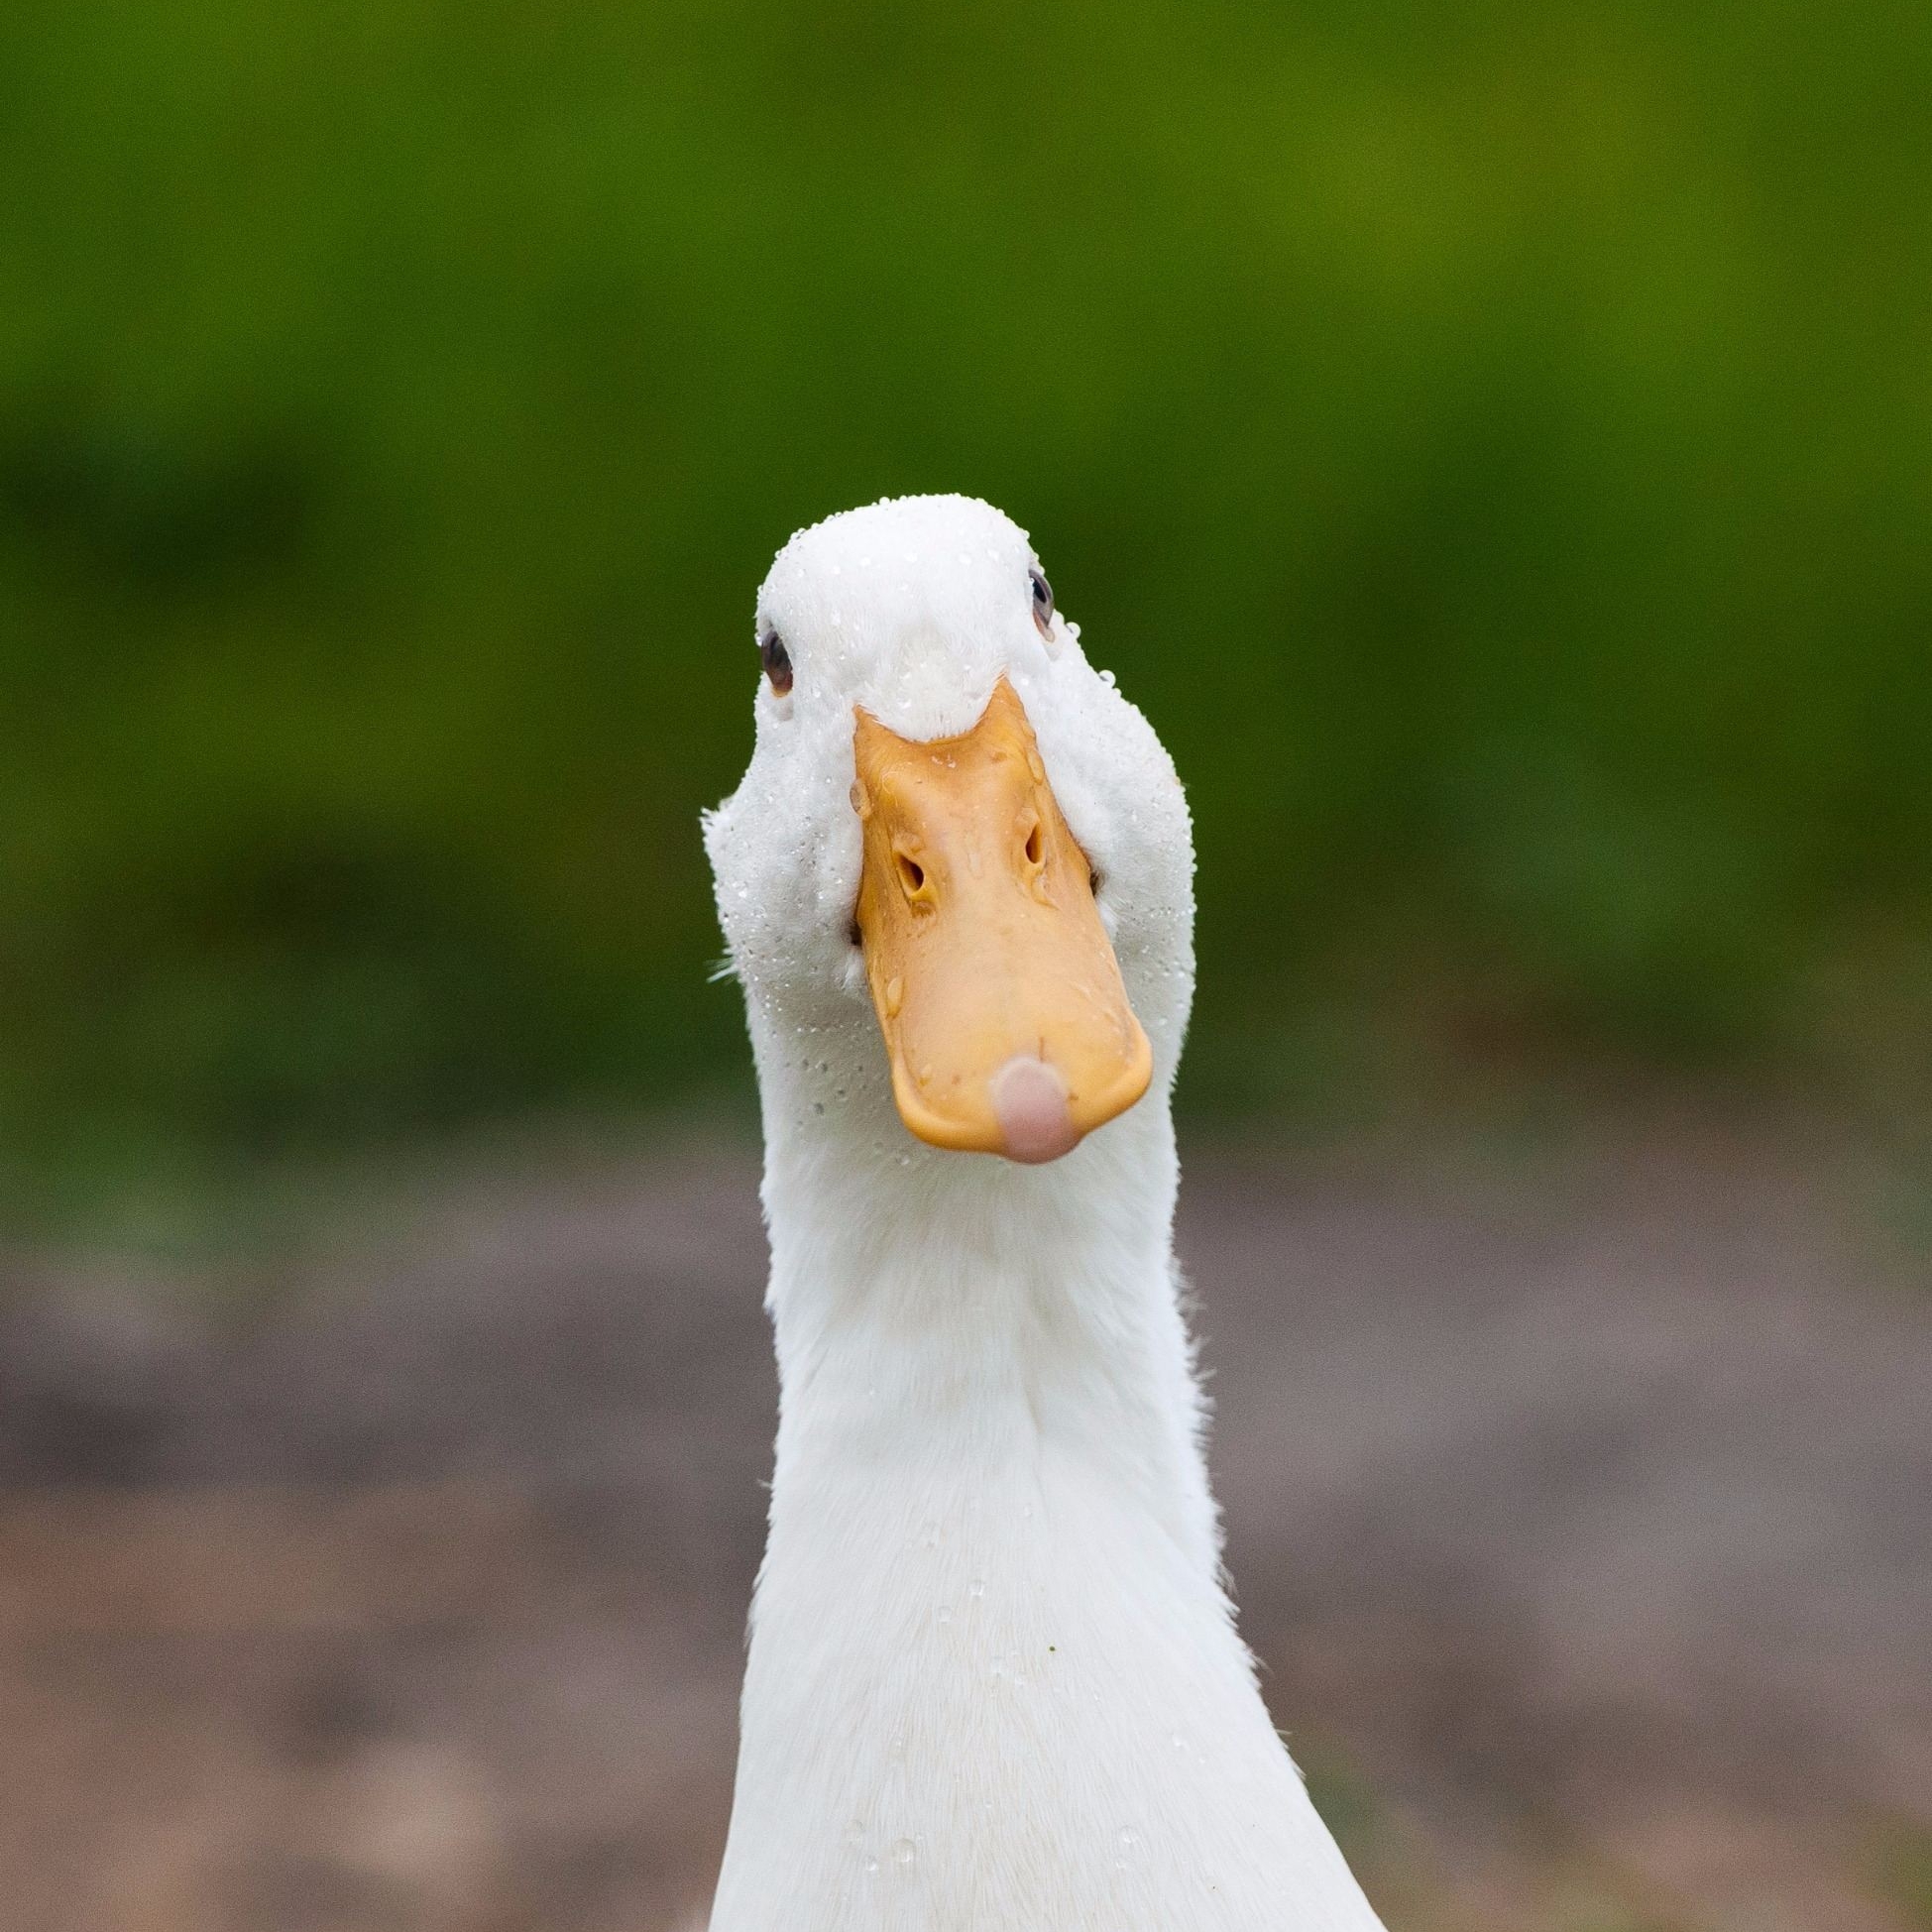 Duck Greeting Card, Photo, photographic greeting card, West Sussex, Farming, Countryside